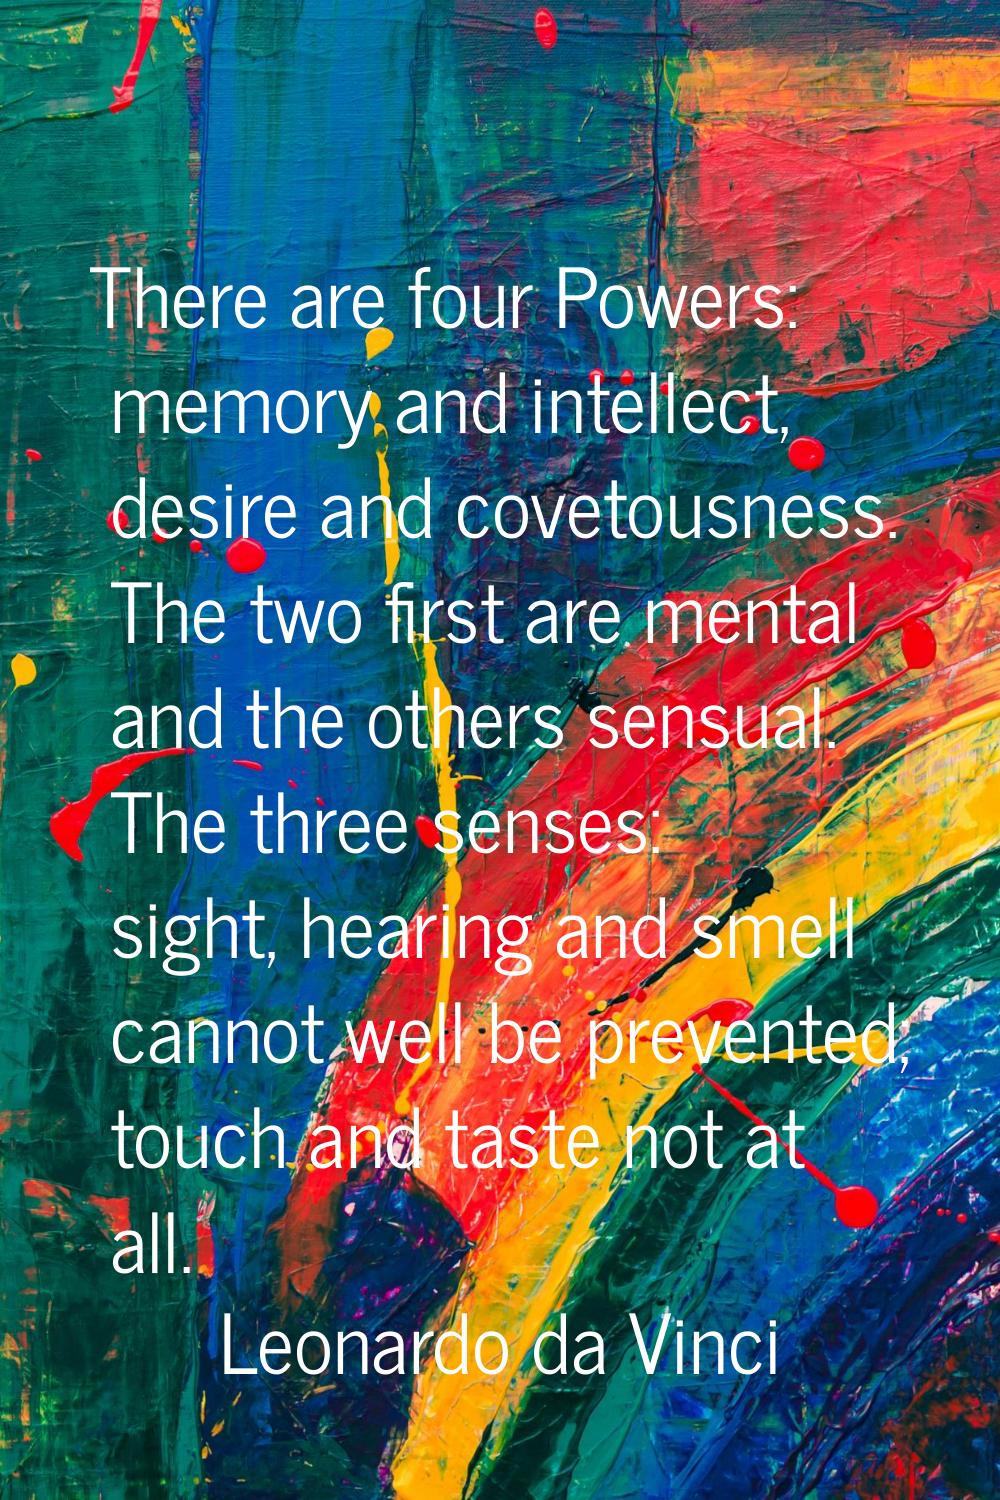 There are four Powers: memory and intellect, desire and covetousness. The two first are mental and 